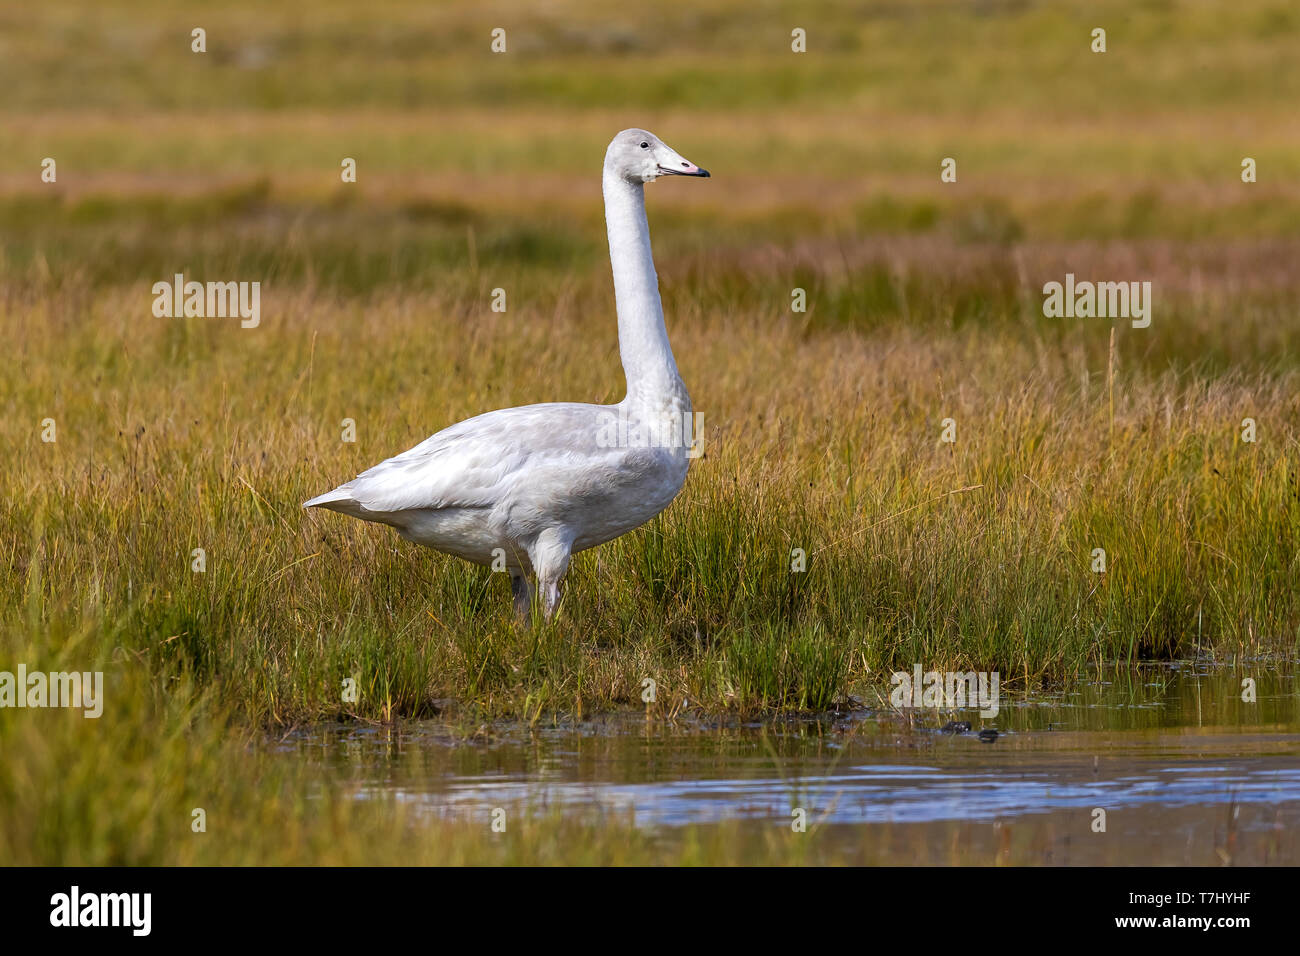 Icelandic Whooper Swan swimming on a pool in Austurland, Iceland. August 22, 2018. Stock Photo